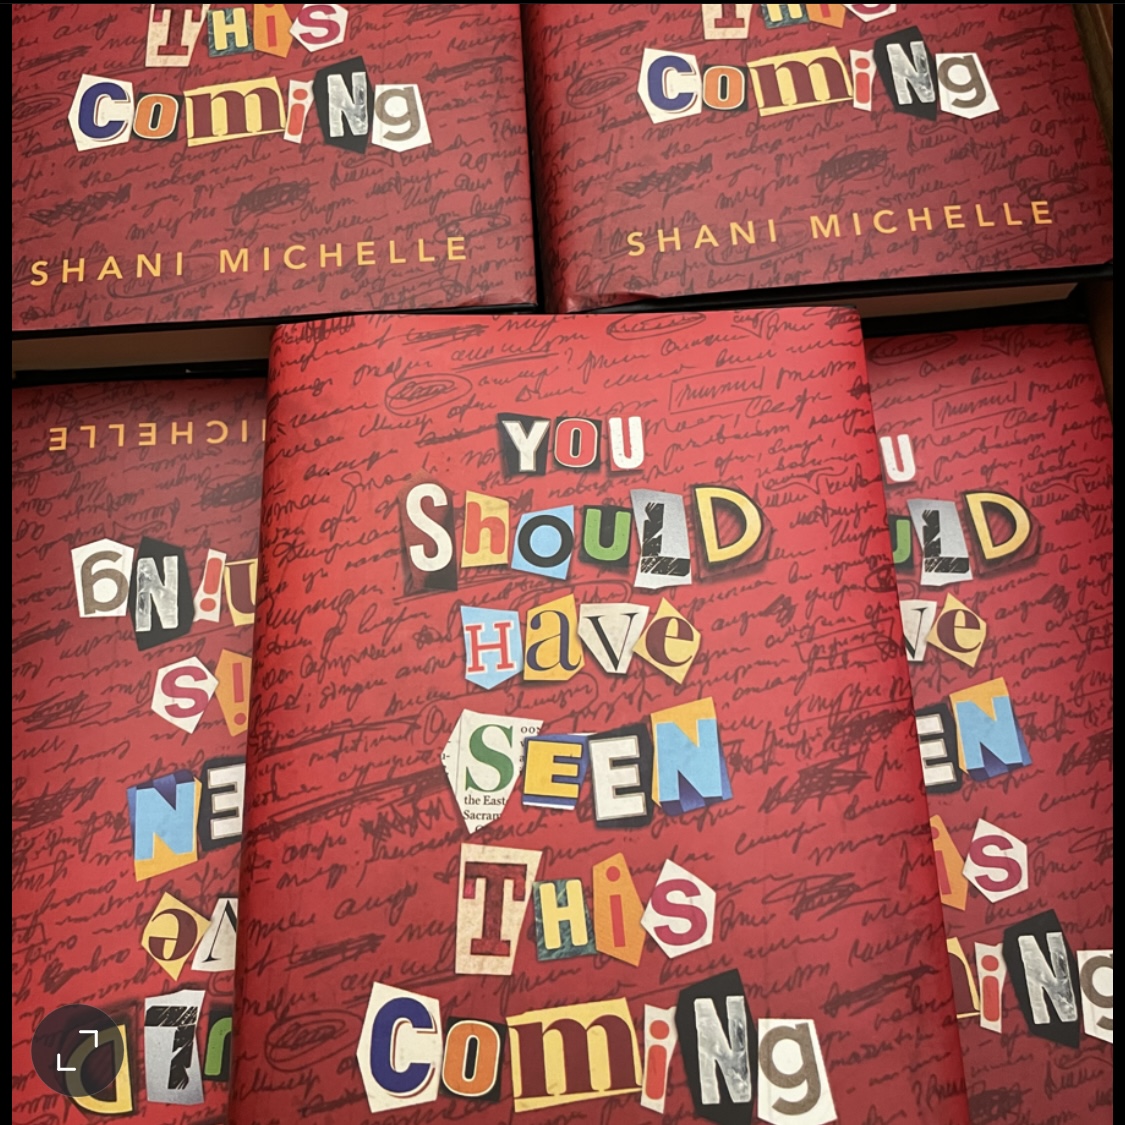 Look what I got!! It's getting real!! You Should Have Seen This Coming debuts April 12th. (by Shani Michelle - audiobook narrated by Shani Petroff 😉). Available for pre-order now. And please request it from your library too! @AuthorShani @SwoonReads @FierceReads